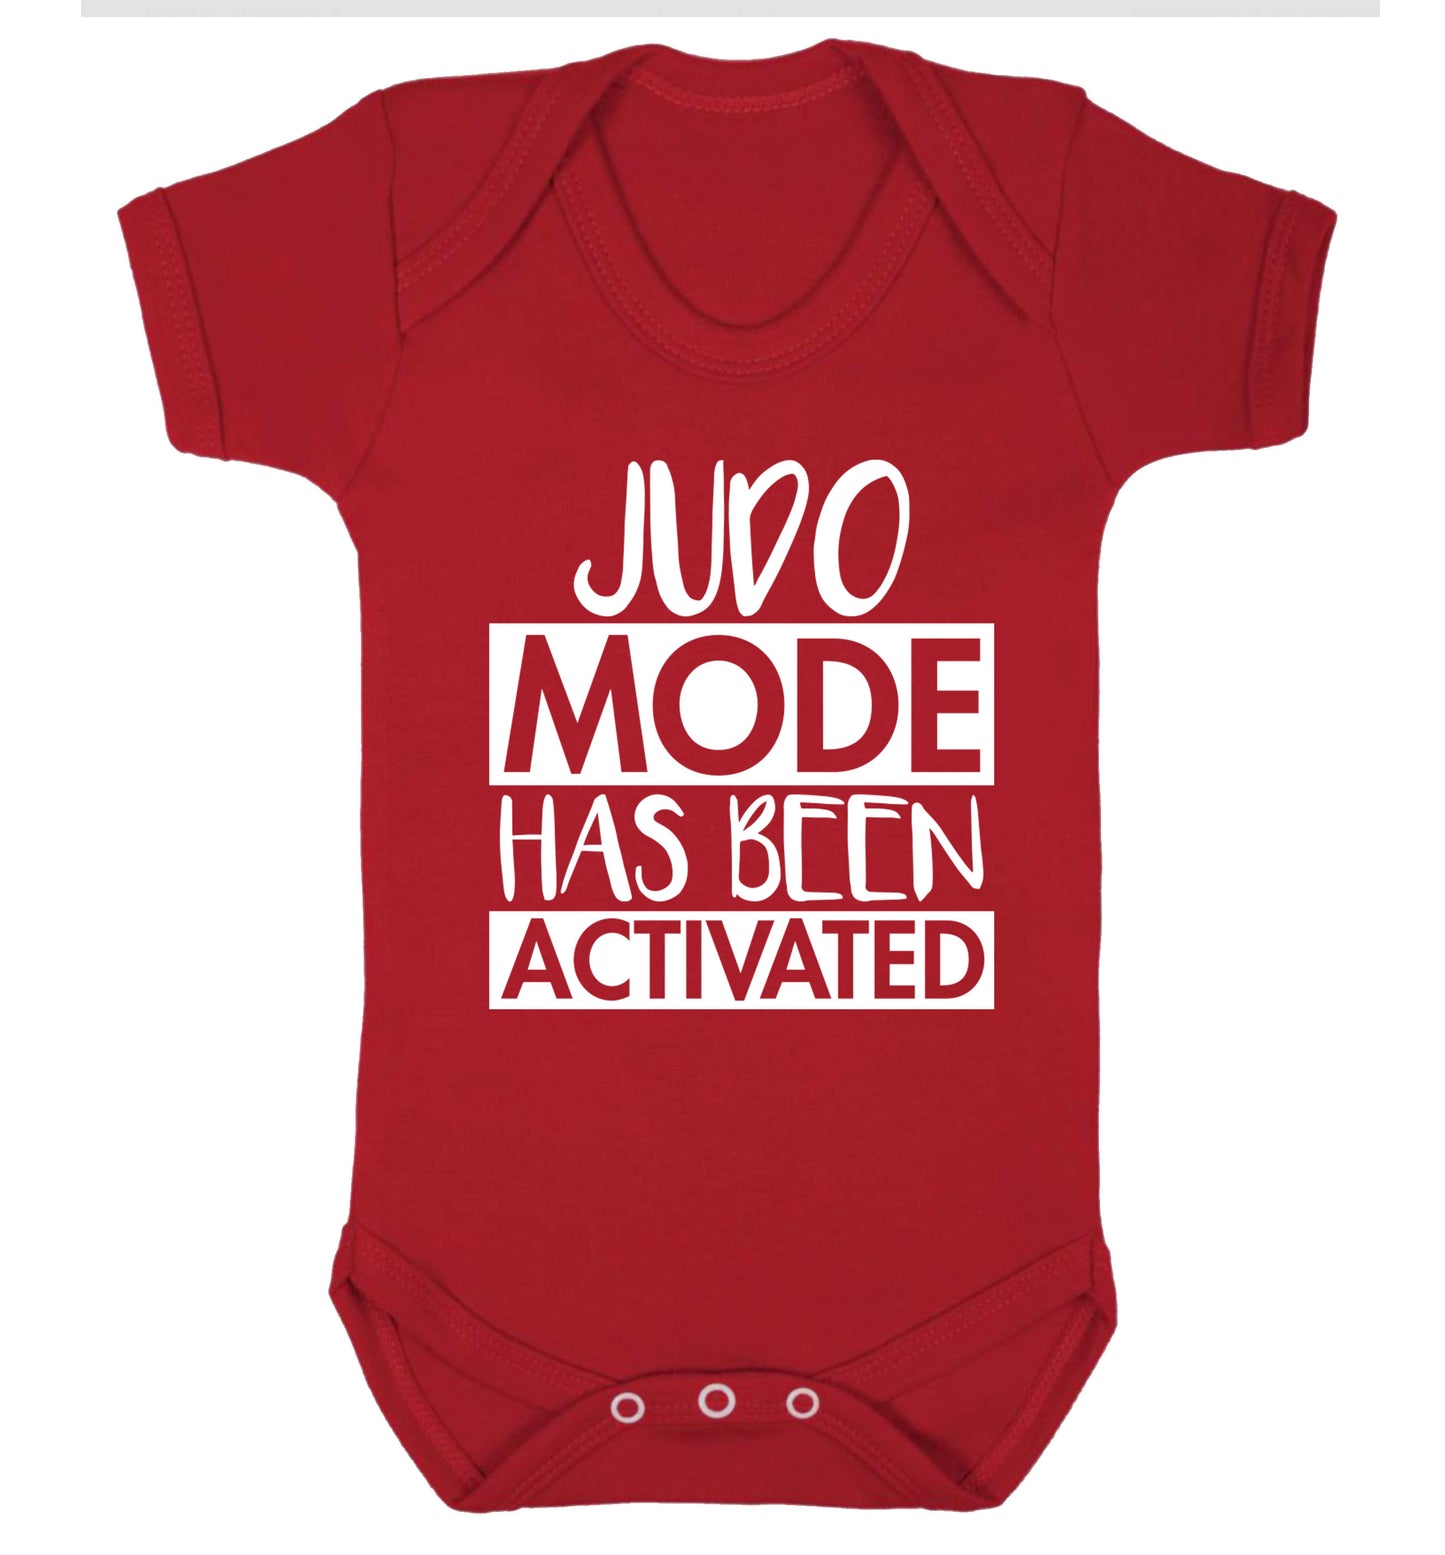 Judo mode activated Baby Vest red 18-24 months